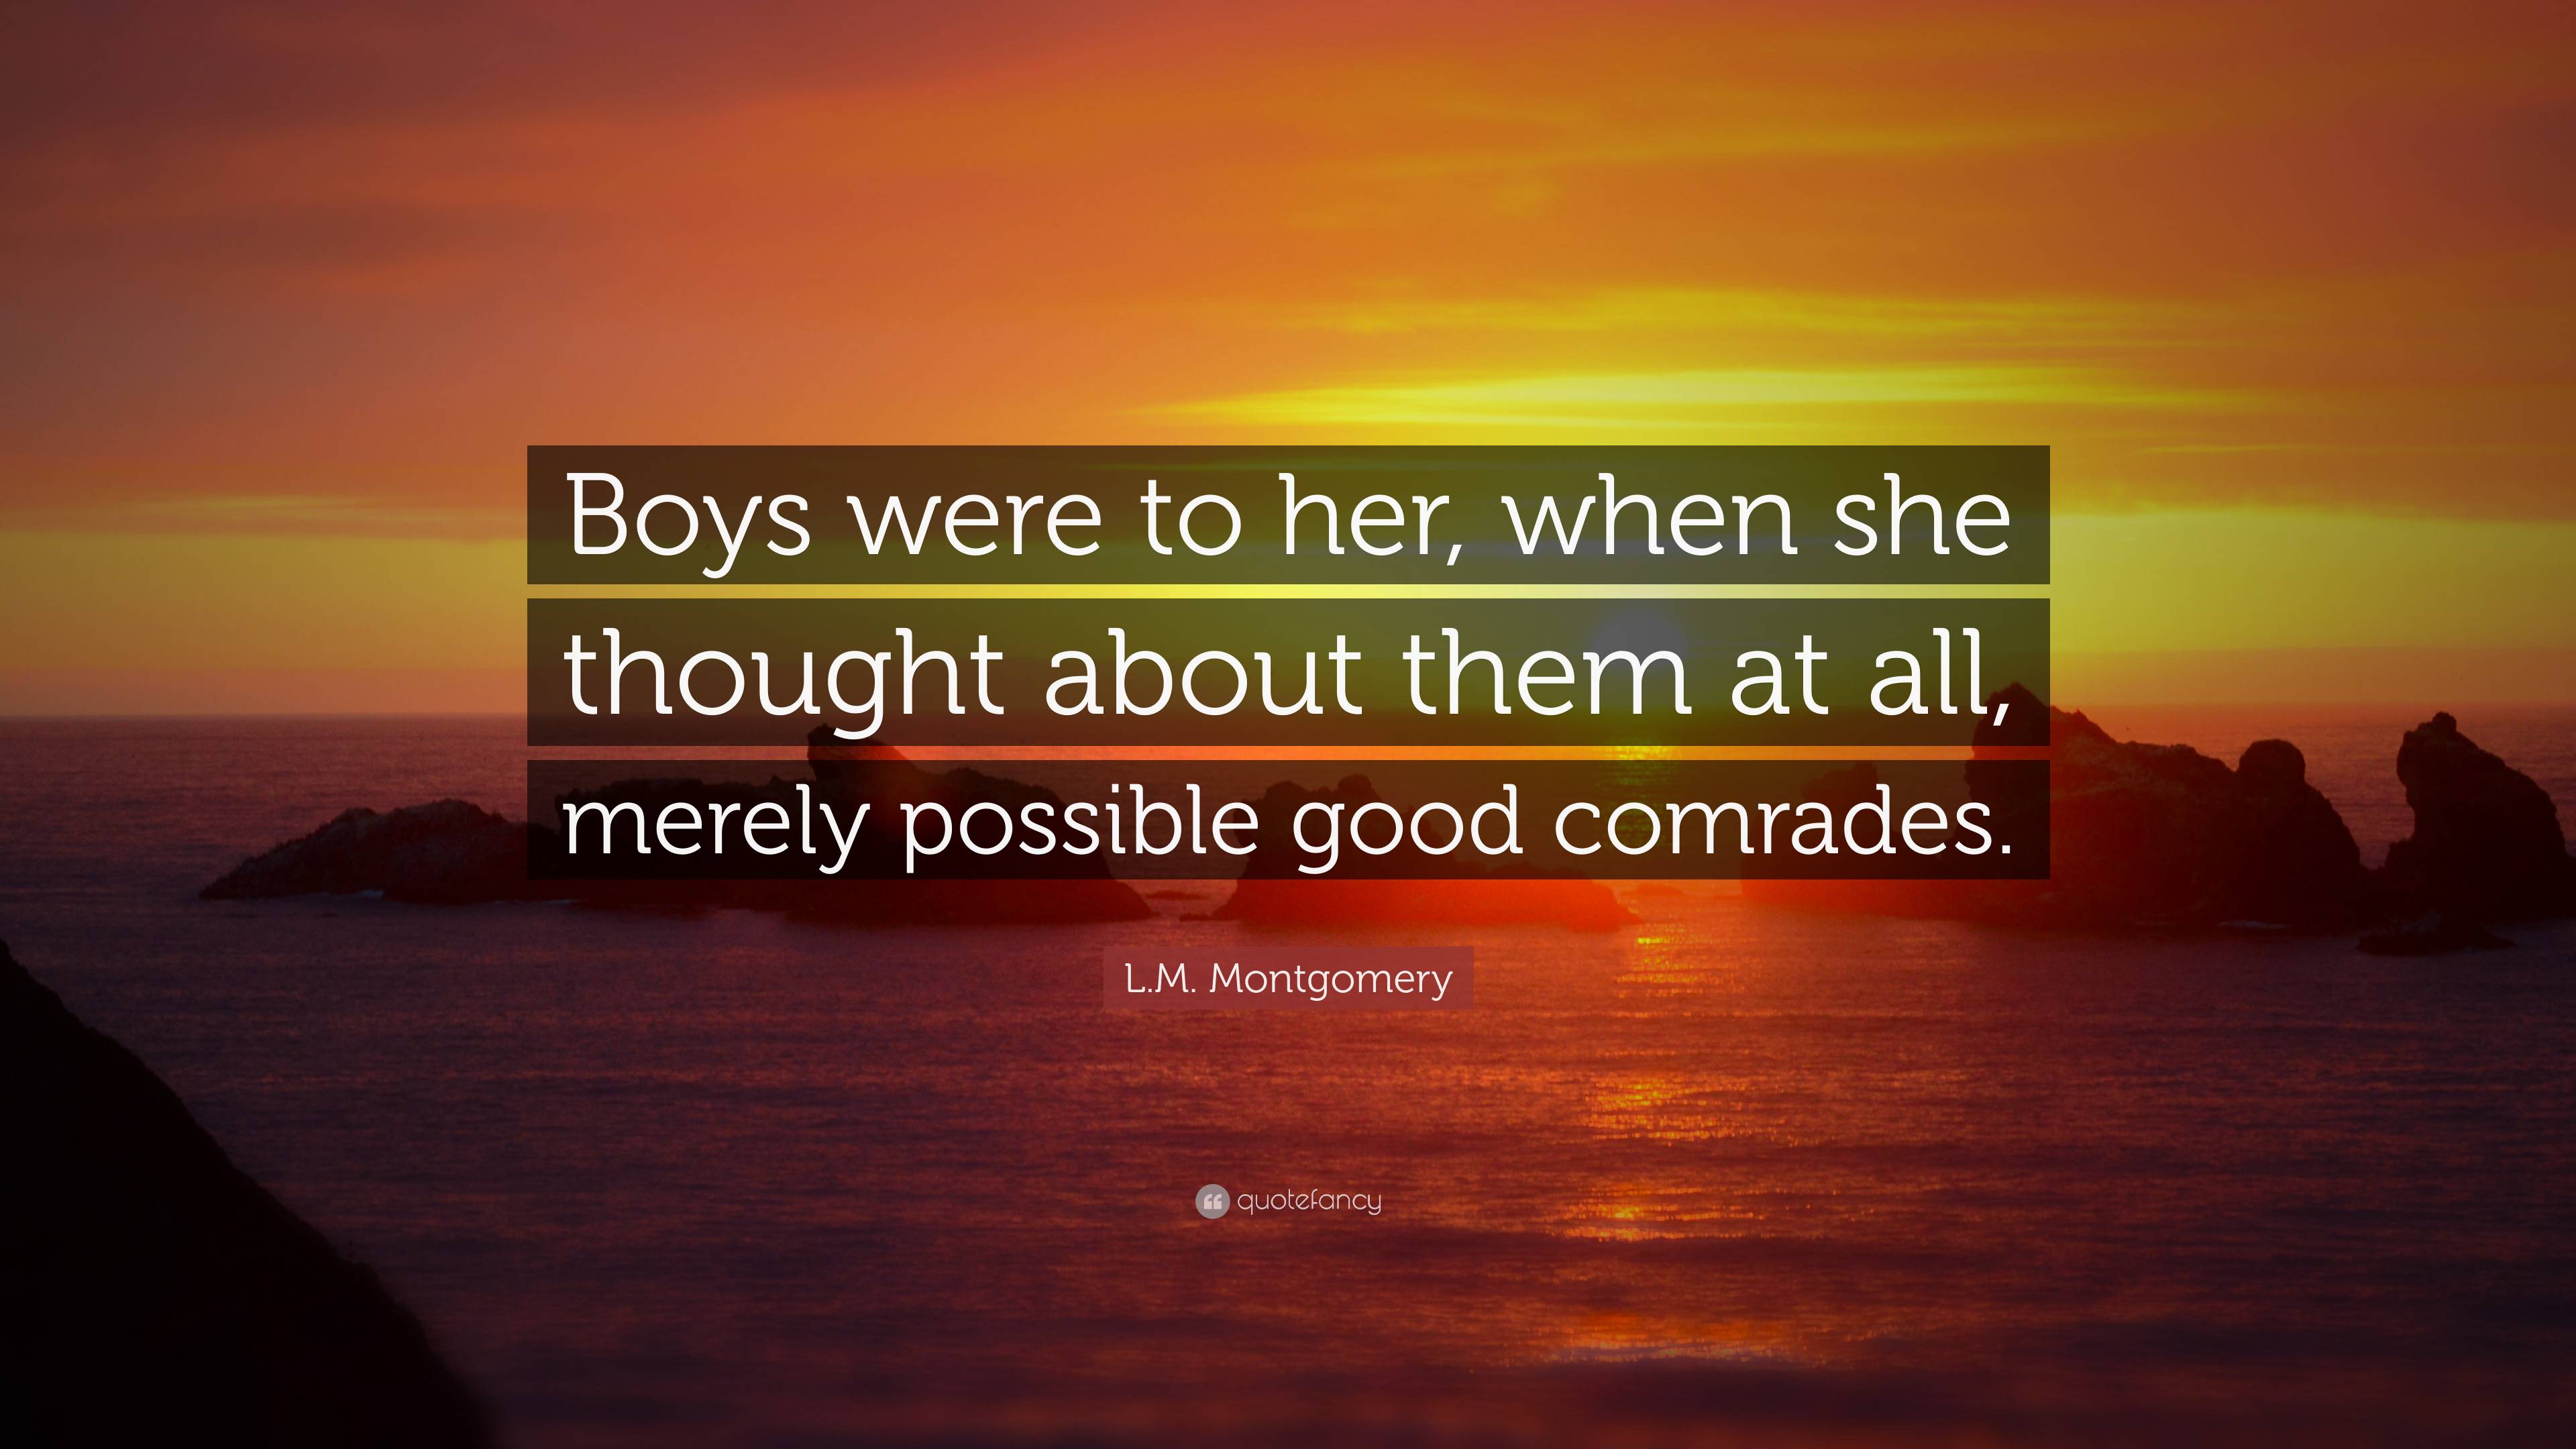 L.M. Montgomery Quote: “Boys were to her, when she thought about them ...